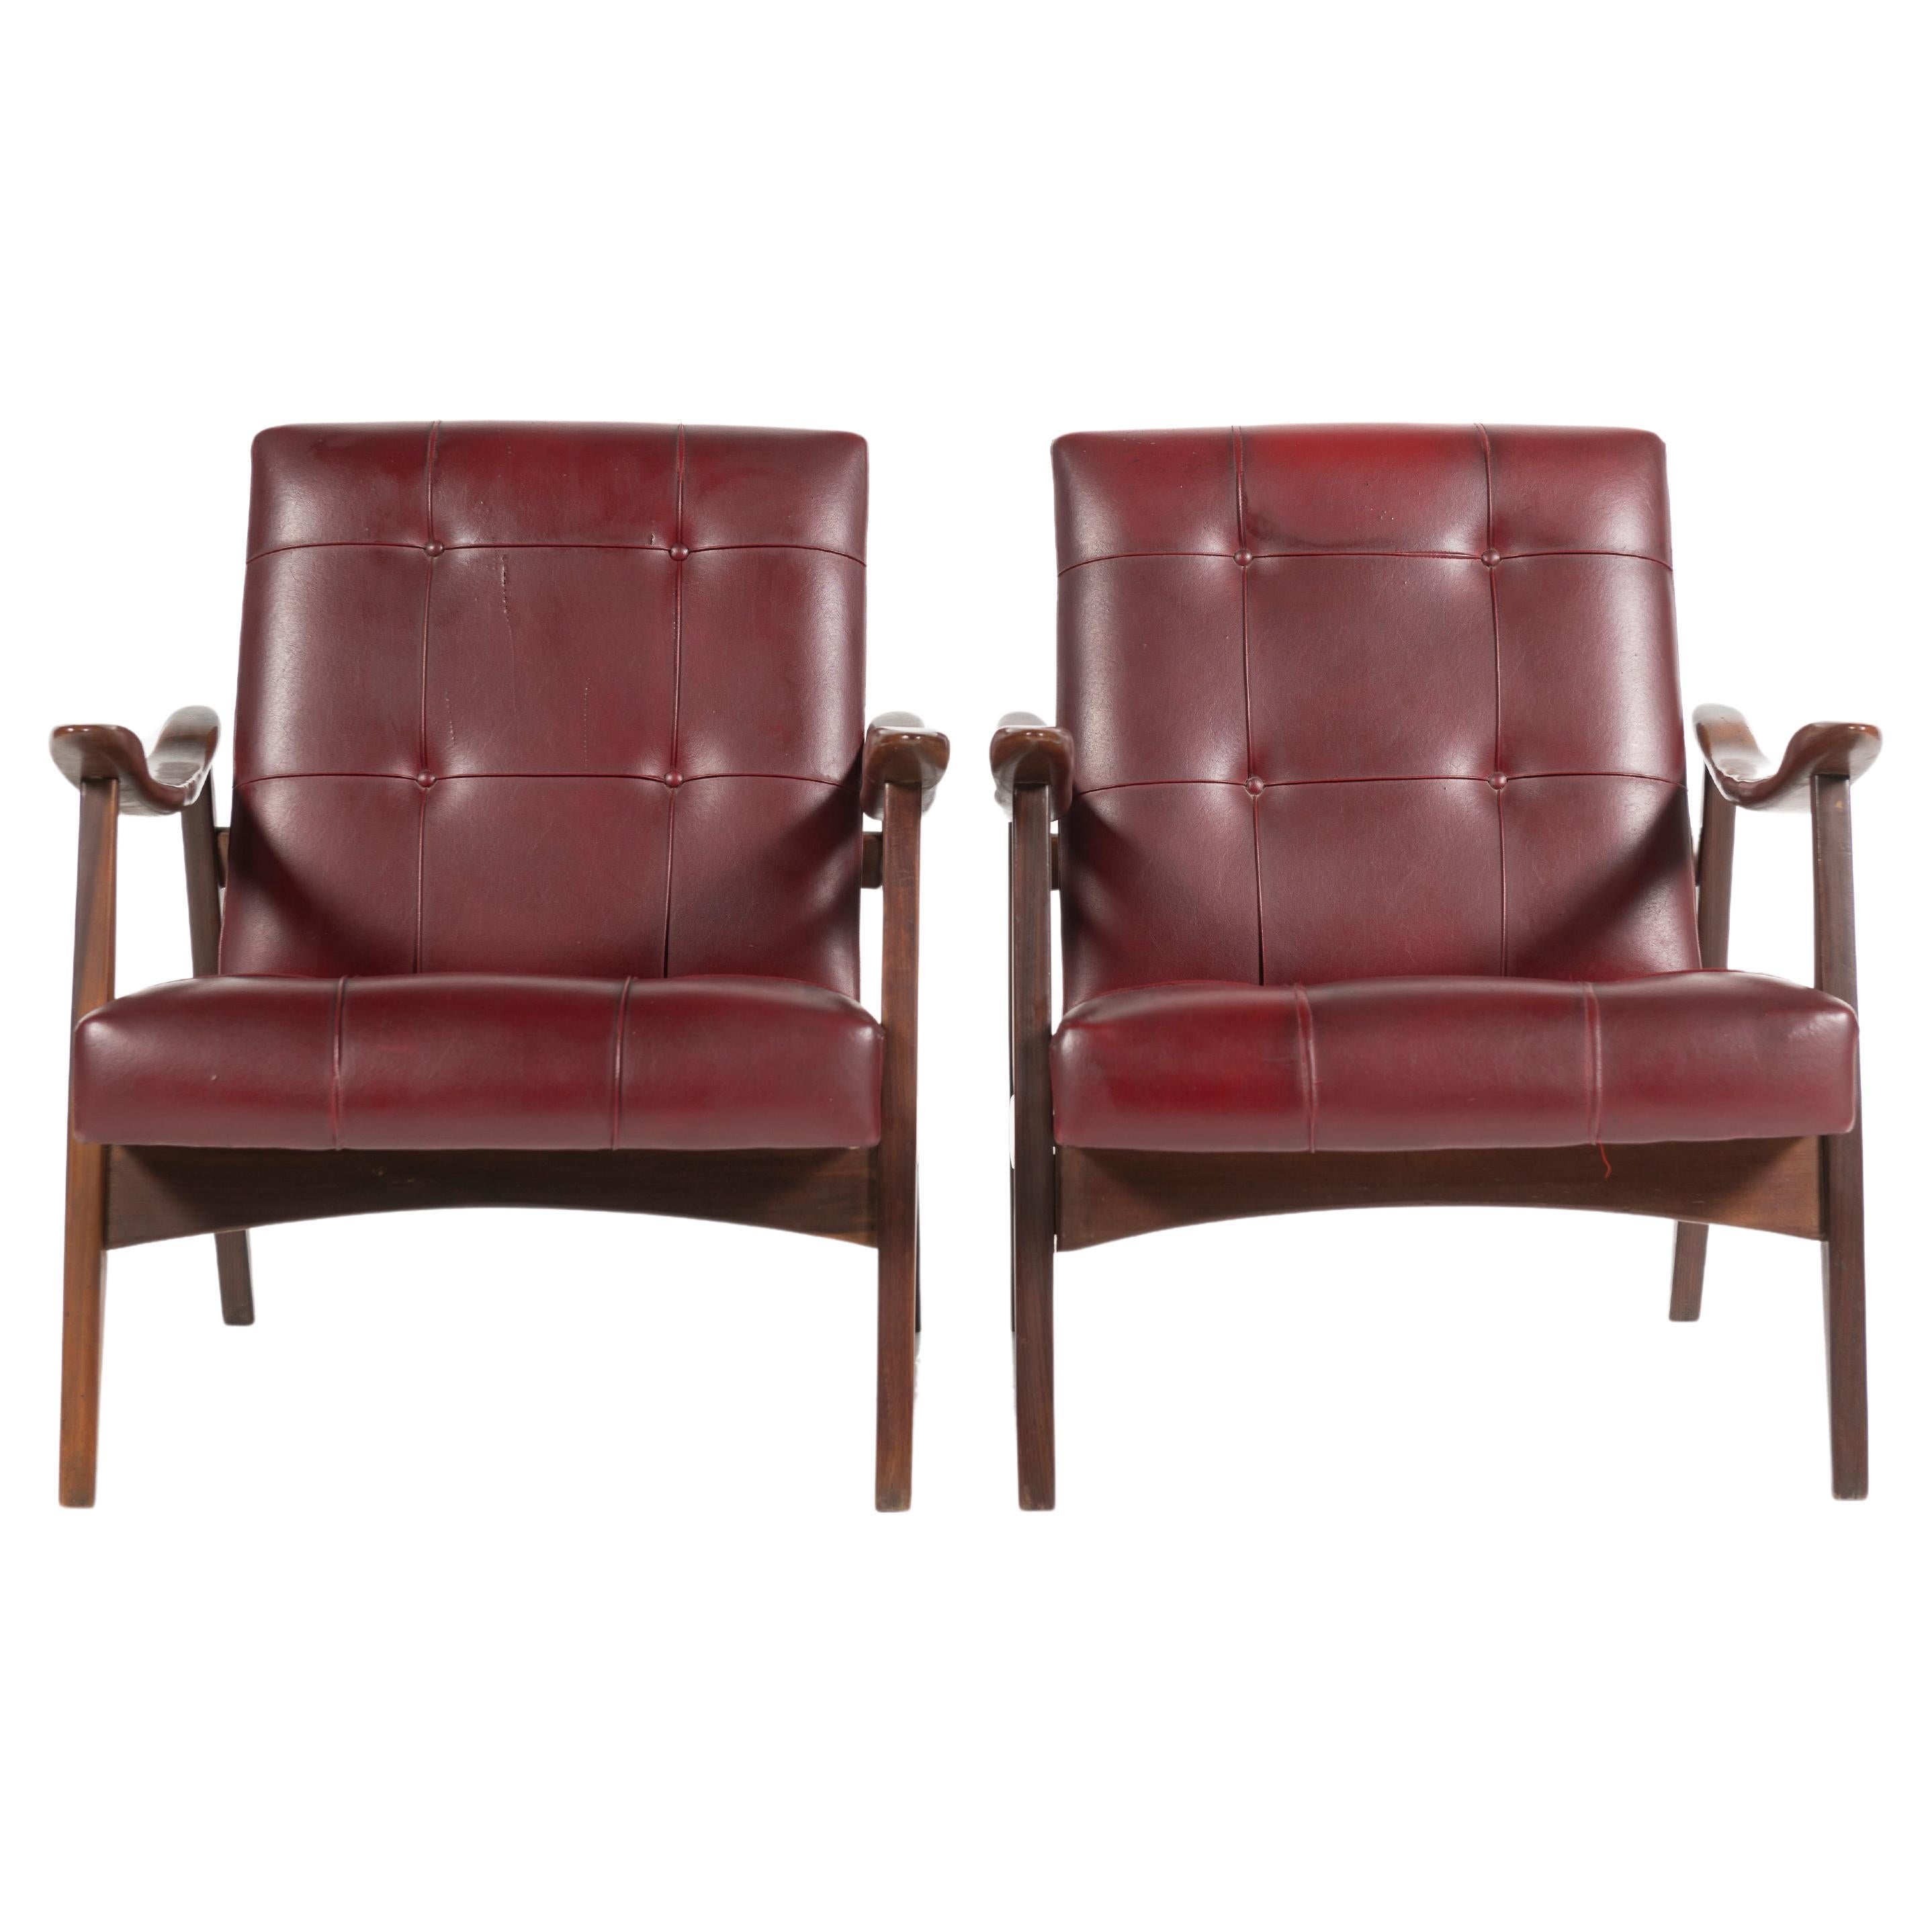 This pair of classic and modern arm chairs are comfortable in most settings. The chairs are in good condition, with patina on both the leather and wood components. Add the pair to any setting, be it living room, den, office or lobby and you've got a